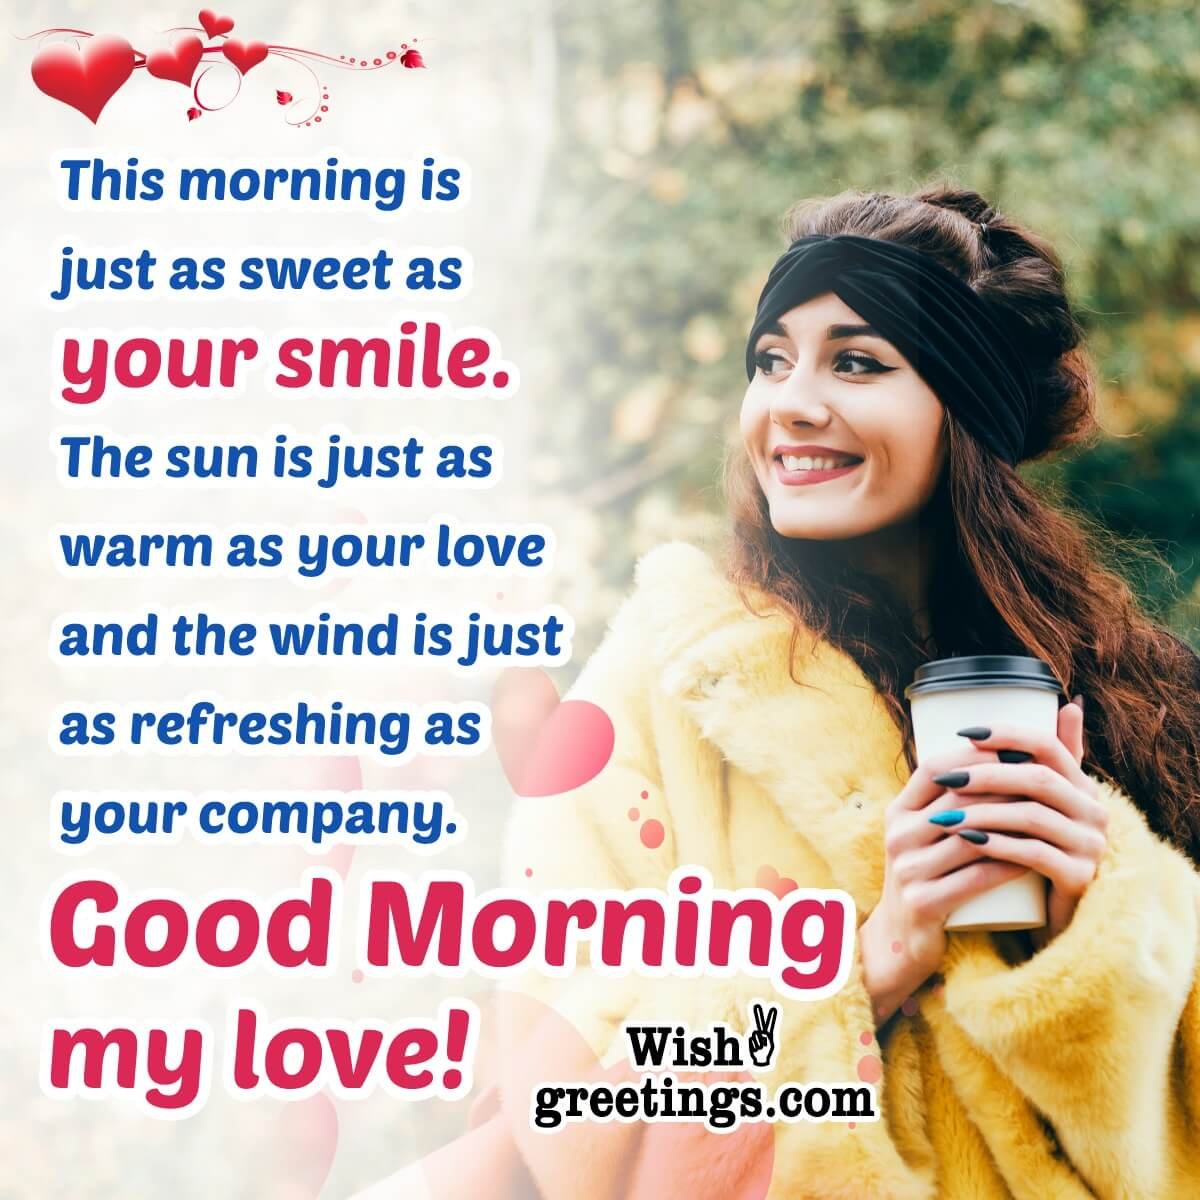 Good Morning Message For Girlfriend To Make Her Smile